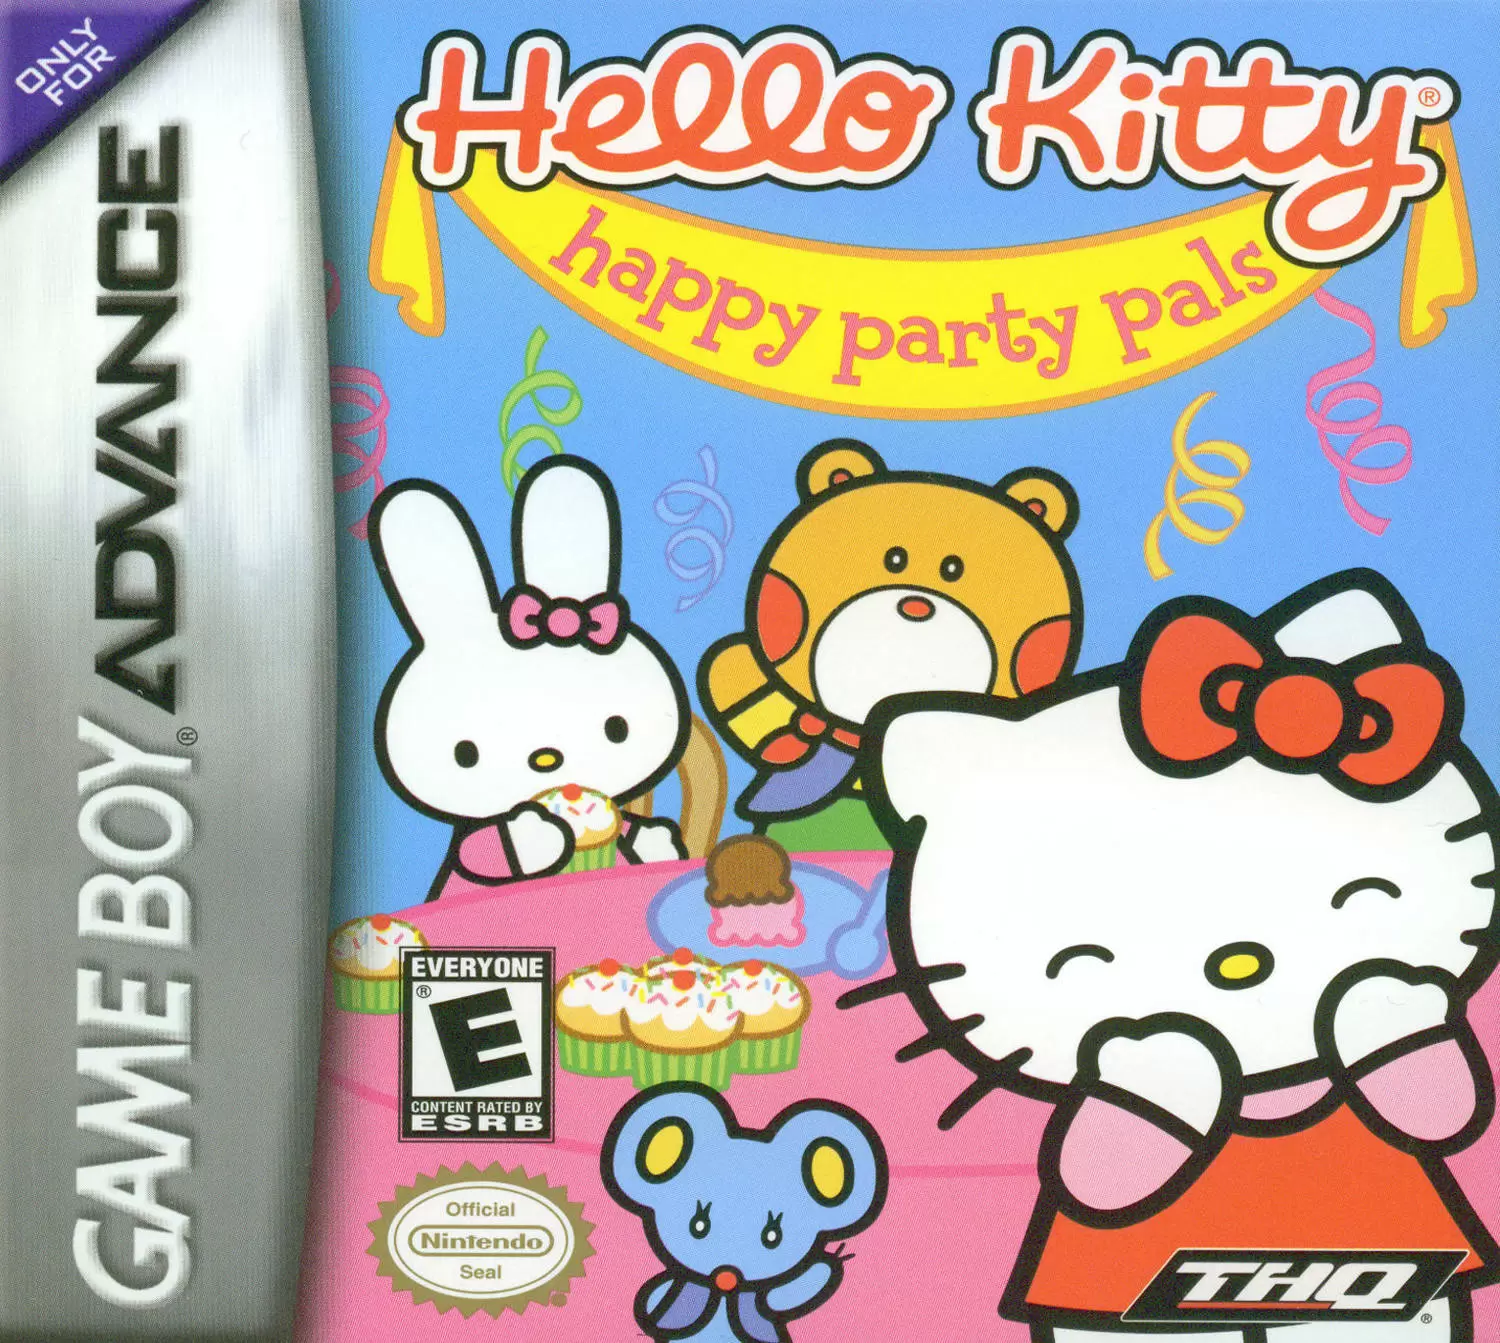 Game Boy Advance Games - Hello Kitty: Happy Party Pals